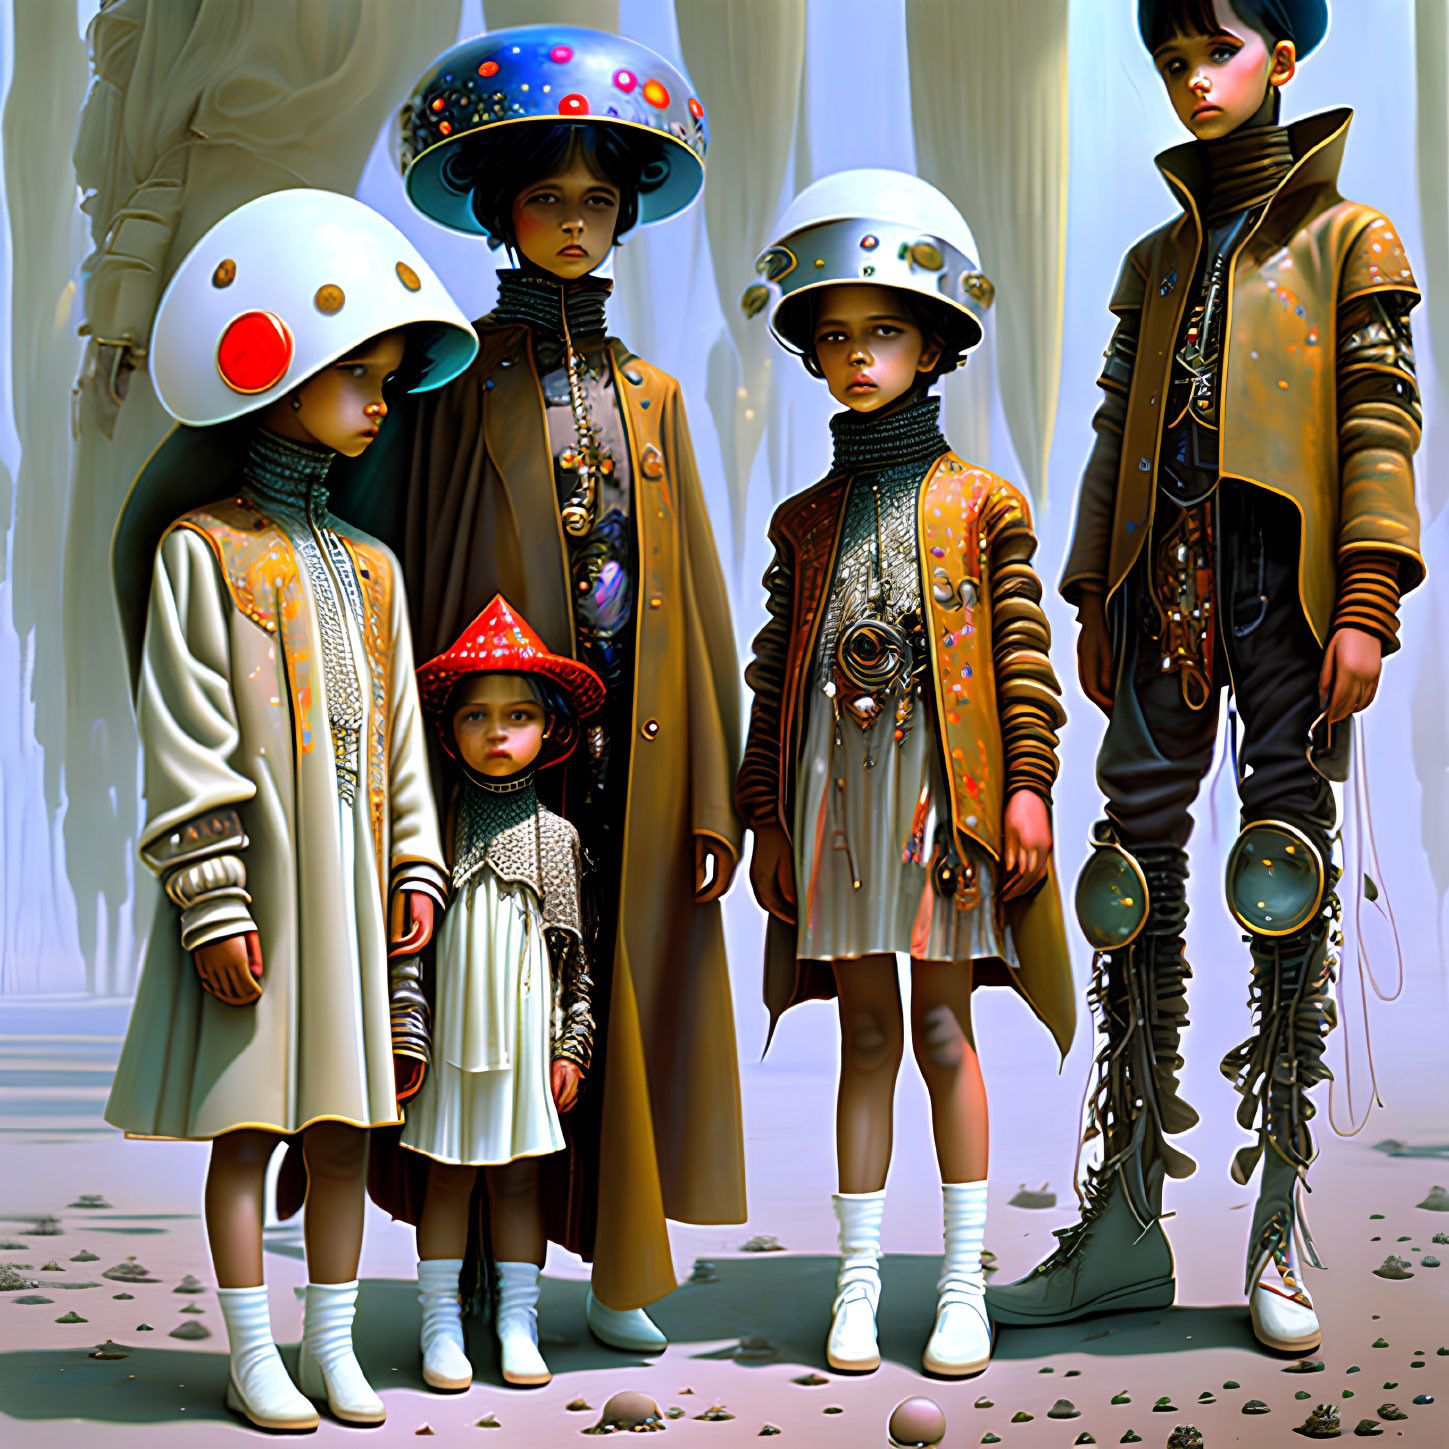 Stylized children in futuristic outfits with oversized helmets in surreal setting